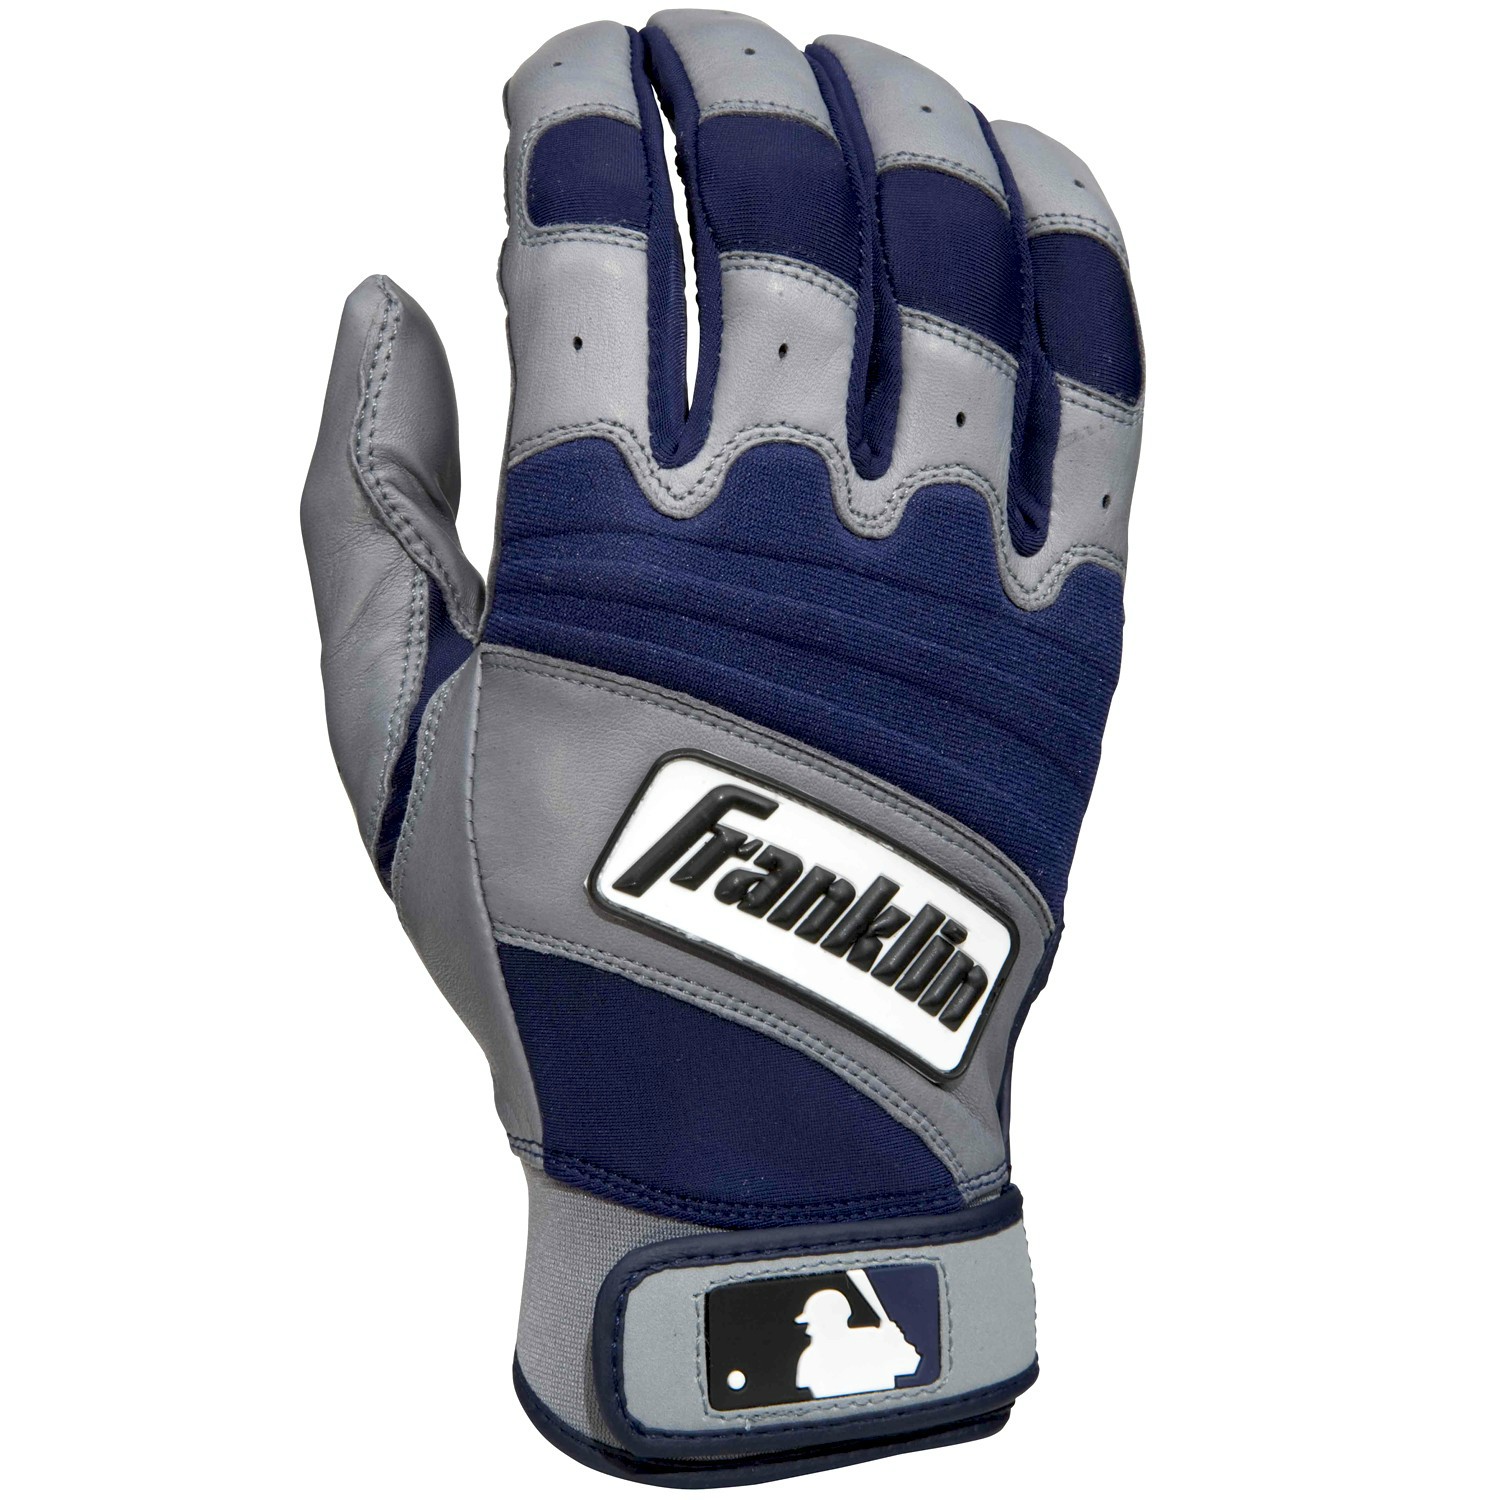 Franklin Sports MLB Youth Natural 2 Batting Glove Gry/Navy Large